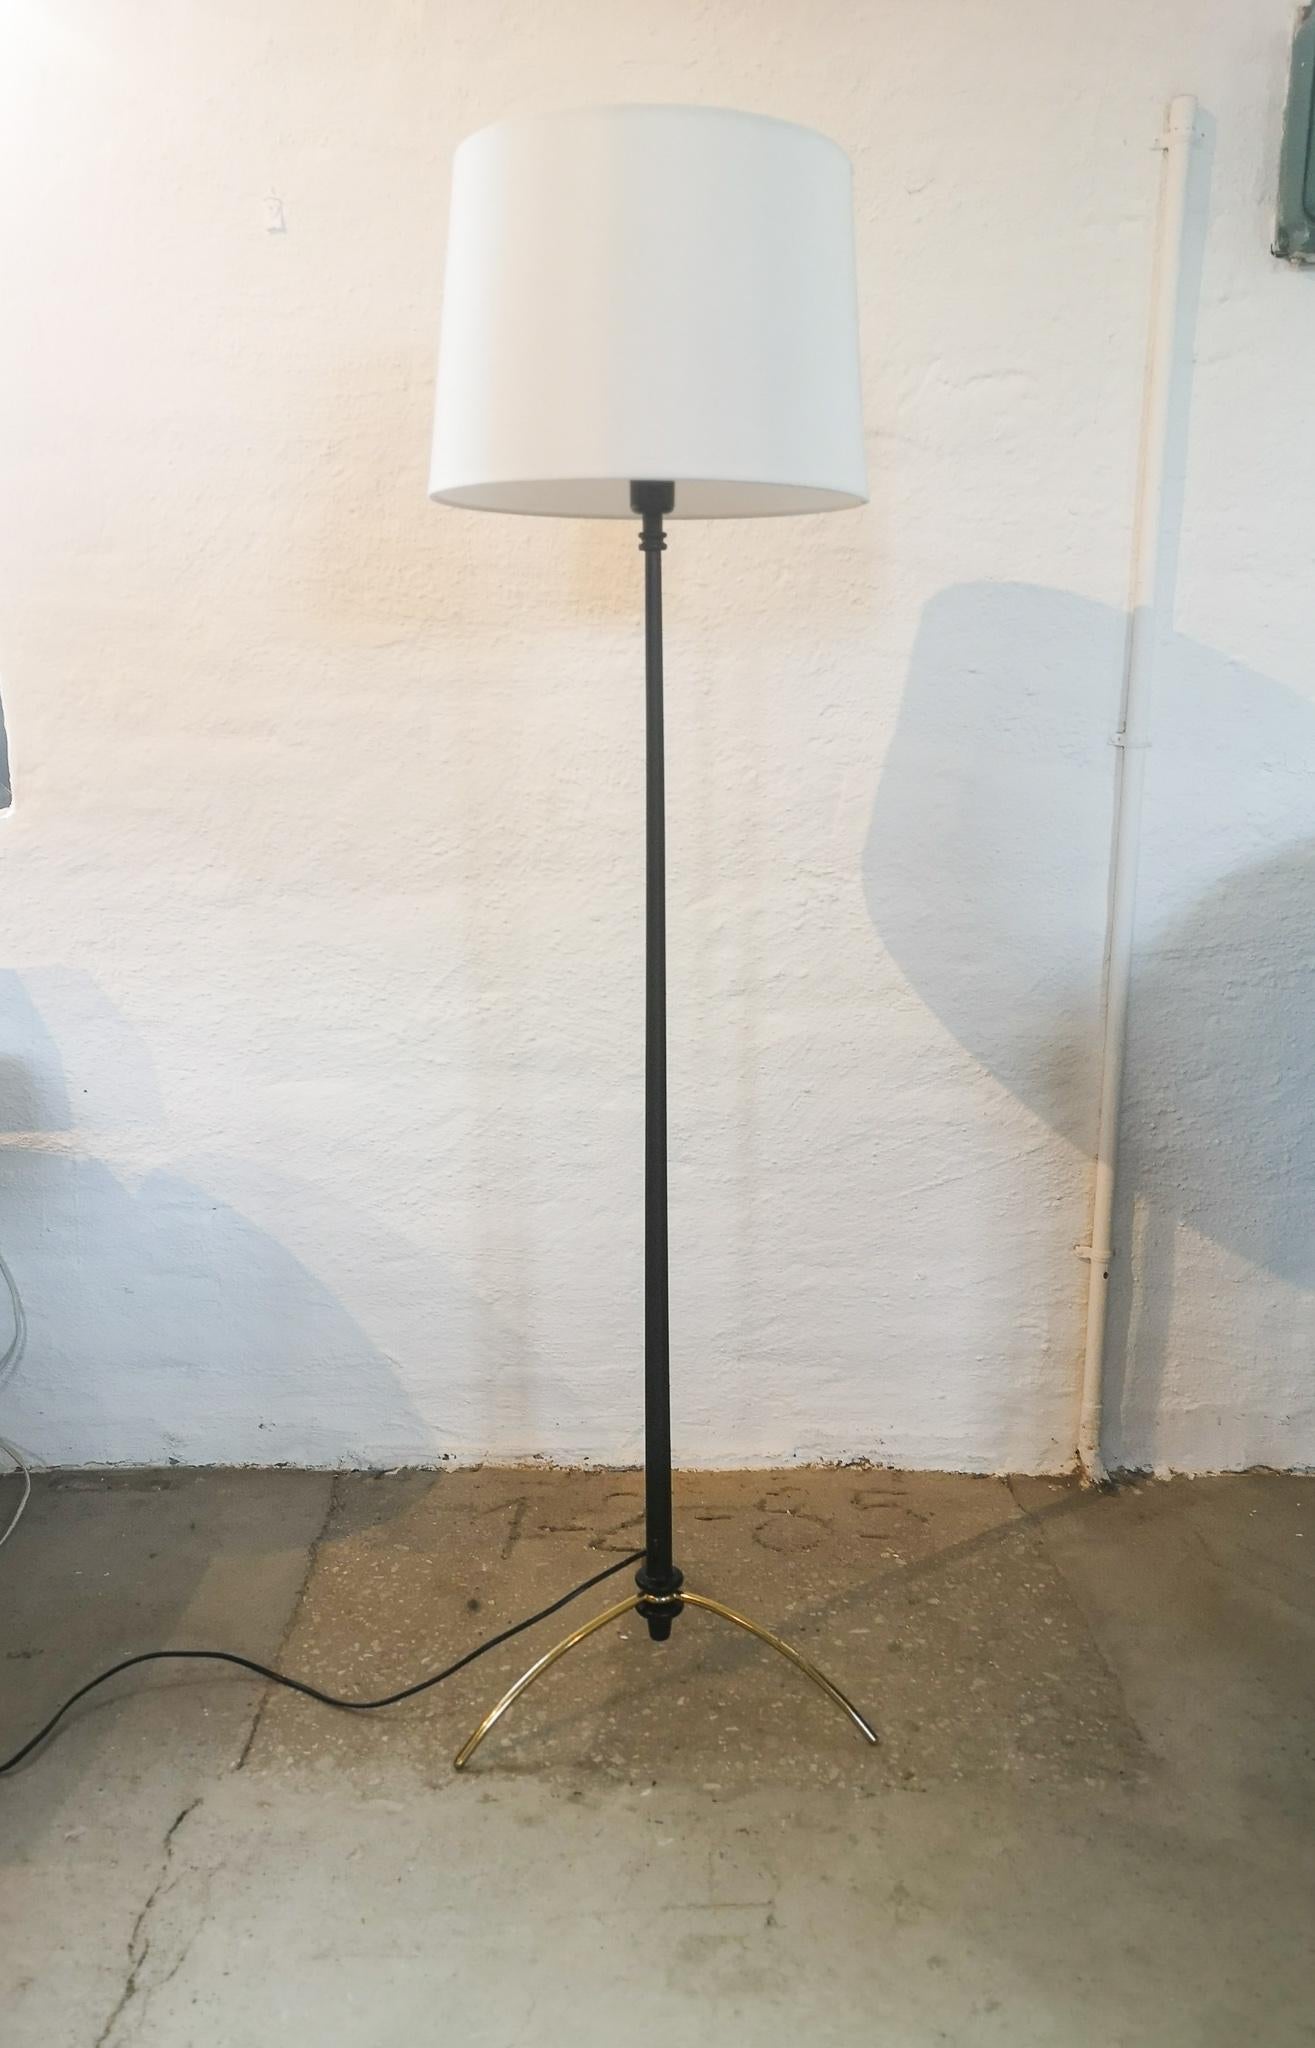 Wonderful floor lamp produced in Sweden in the 1960s. And designed by Hans Agne Jakobsson. The model G45 has a solid brass stand and the lamp holder is made of black painted wood. Not original shade.

Good working condition, with some vintage